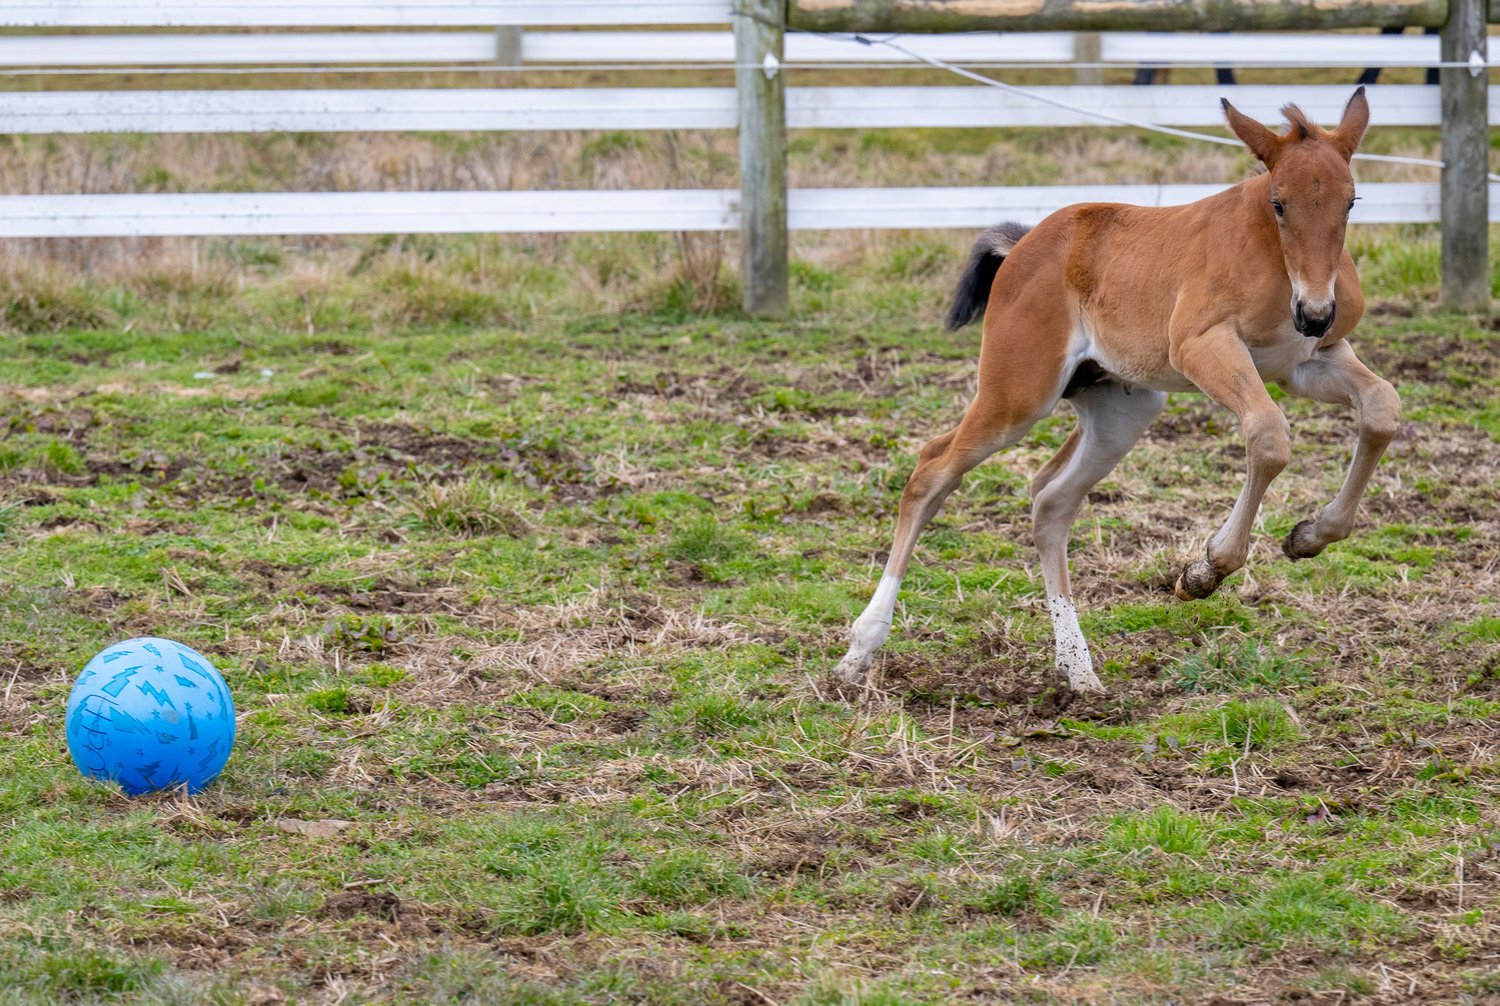 Frolicking in a pasture beside his mother, 3-week-old Gouda leaps in the air at the sound of Associate Professor Cory Kieschnick, Chair of Delaware Valley University’s Department of Equine Science and Management.